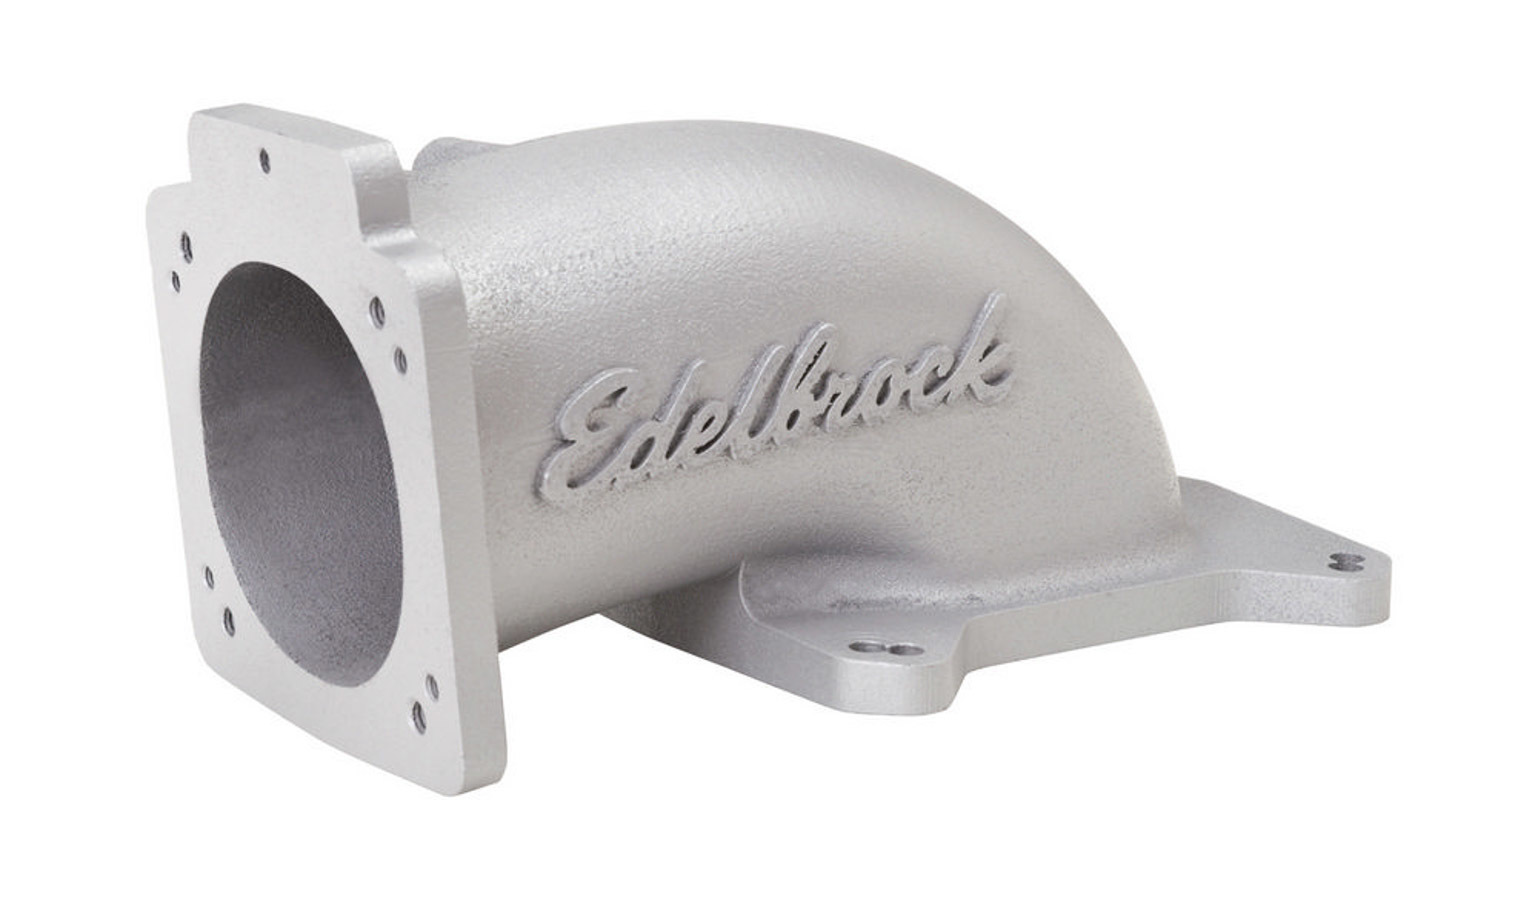 Edelbrock 3848 Intake Elbow, Low Profile, 90 mm Max Throttle Body, Aluminum, Natural, Square Bore, Each